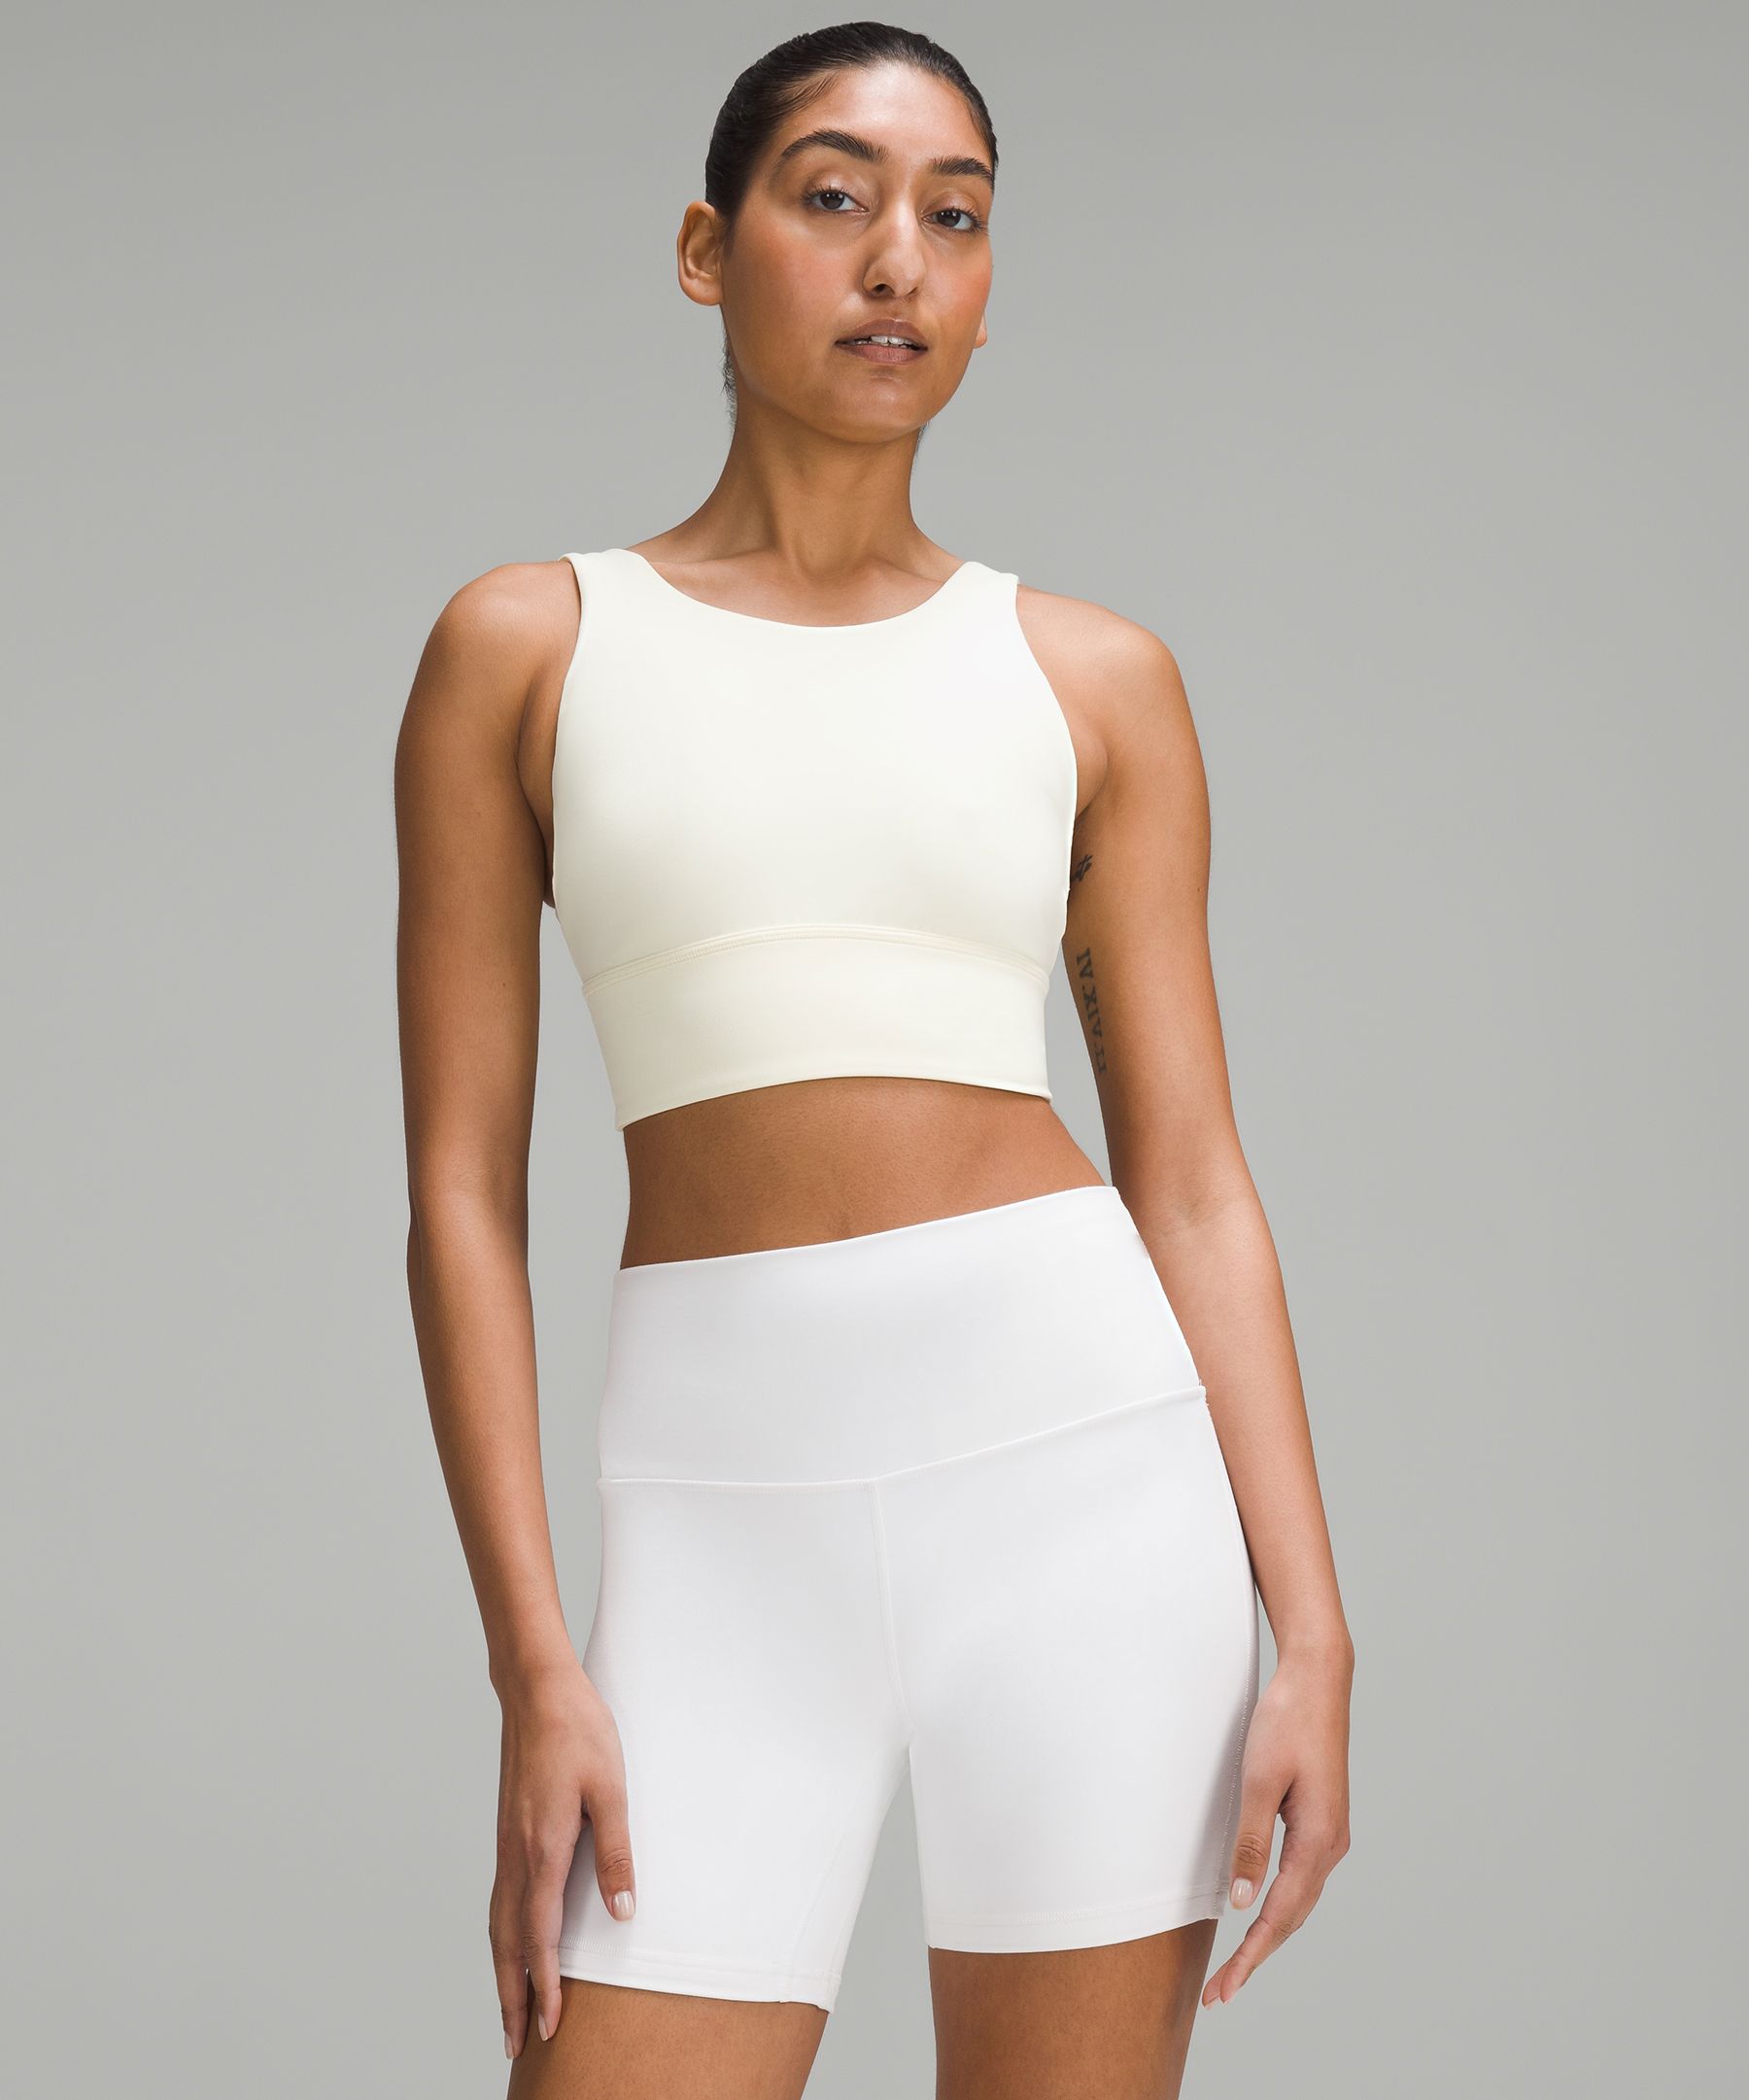 Pre-Owned Lululemon Athletica Womens Size 12 Track India